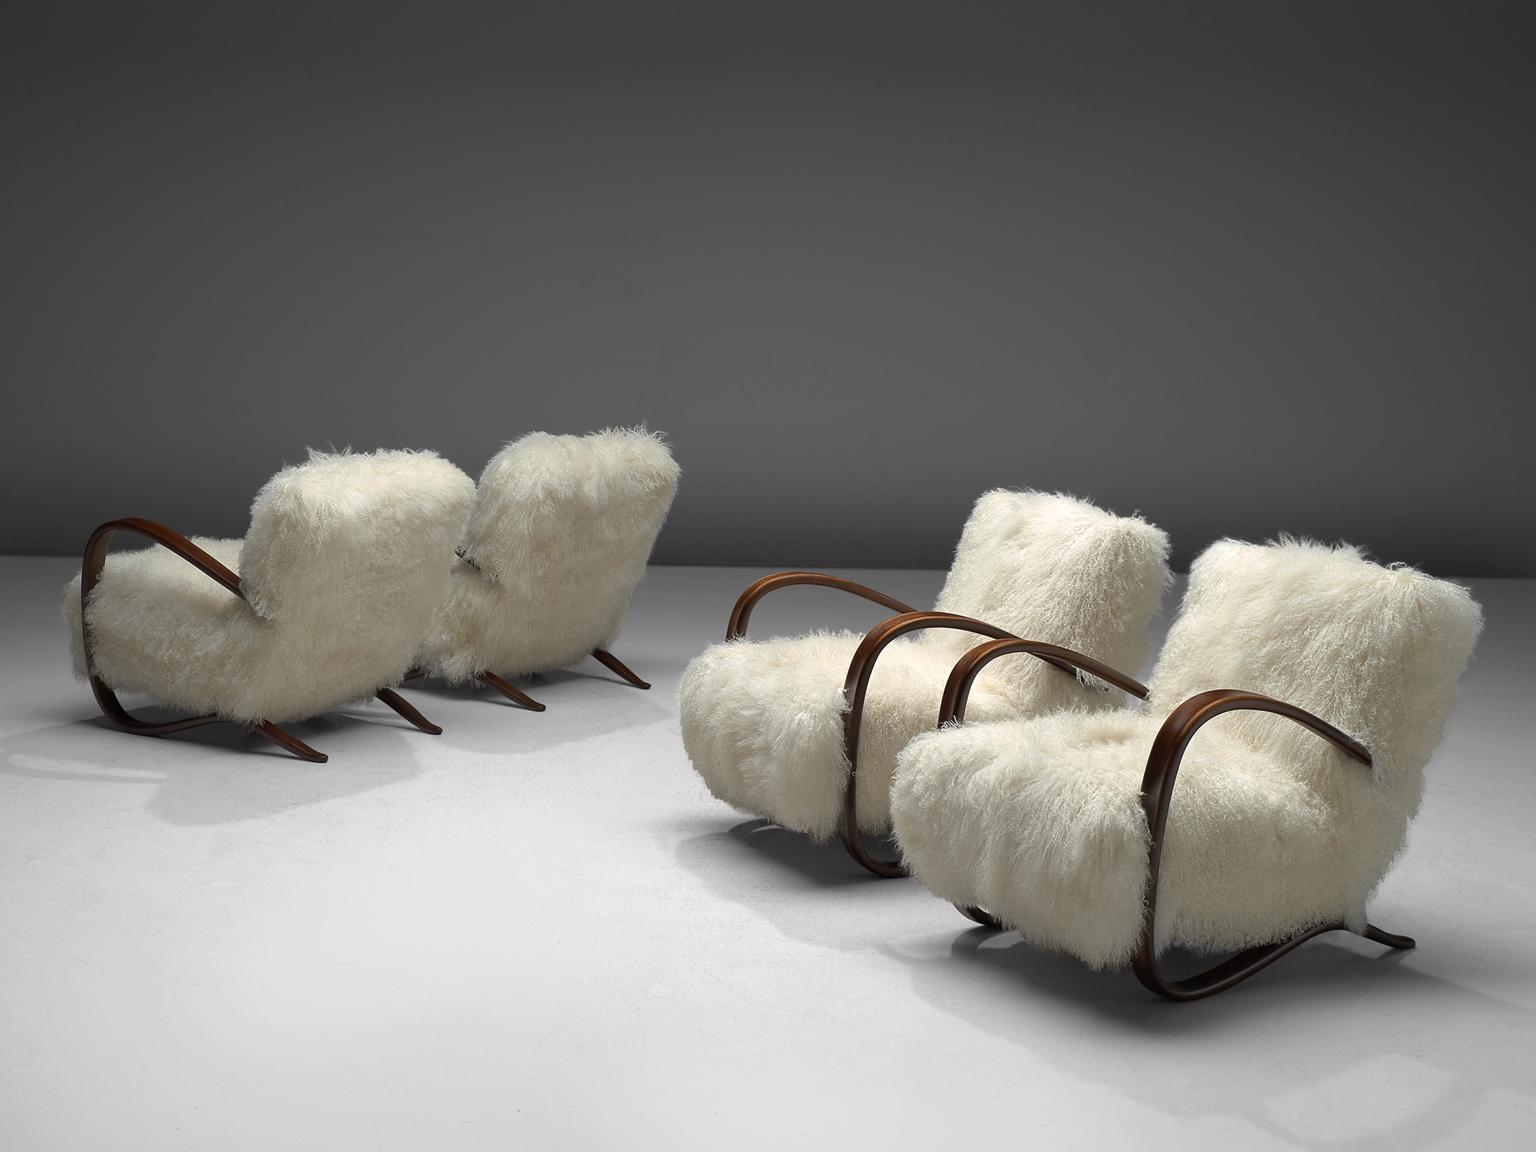 Jindrich Halabala (1903-1978), set of lounge chairs, in stained beech and sheepskin, Czech Republic, 1930s. 

Extra ordinary set of white easy chairs with Tibetan lambswool upholstery. These chairs have a very dynamic and abundant appearance. This